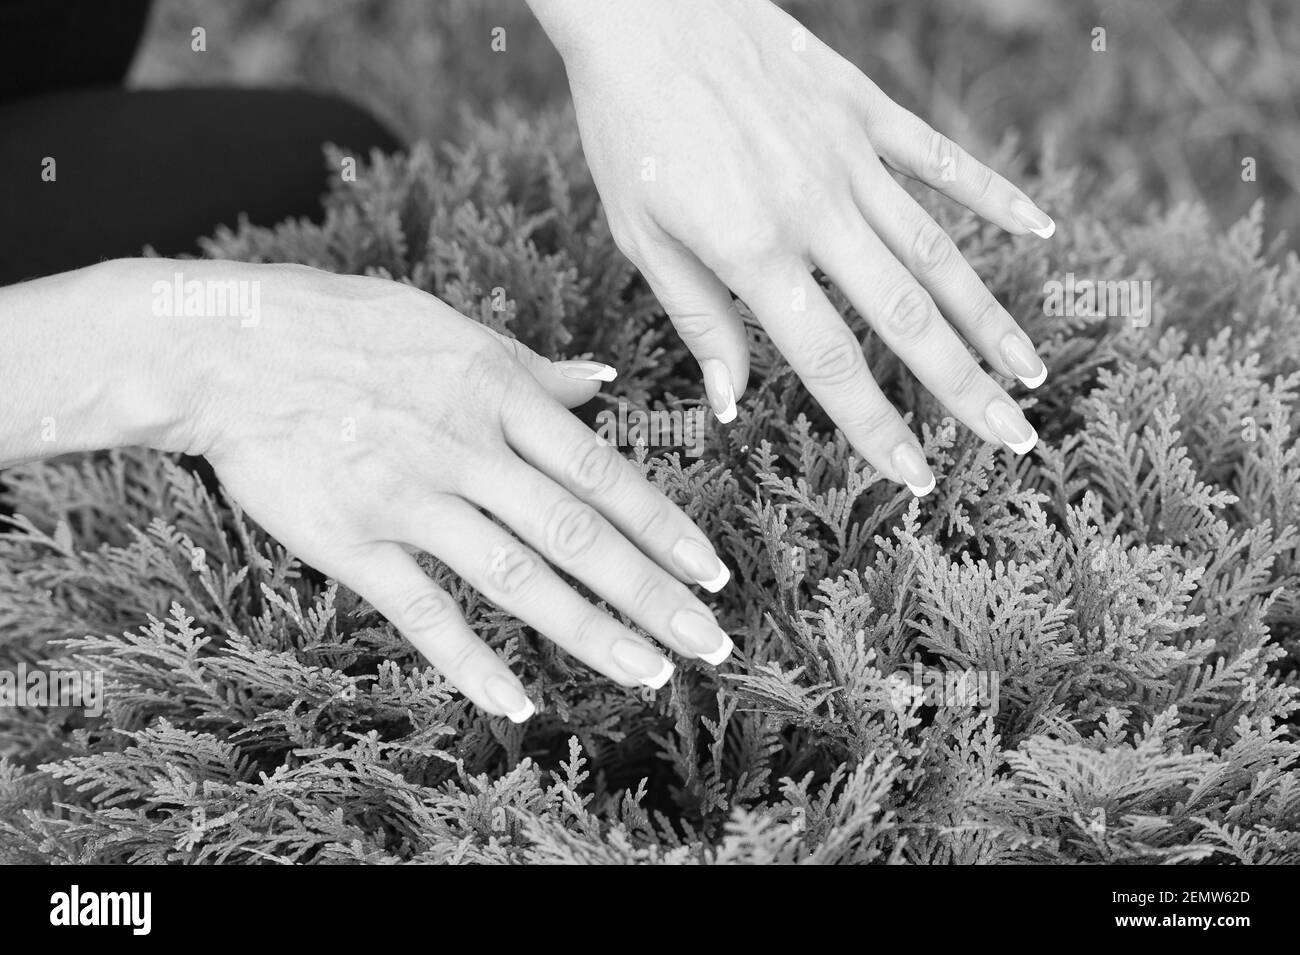 Female hands with perfectly groomed nails on natural evergreen foliage background, manicure. Stock Photo